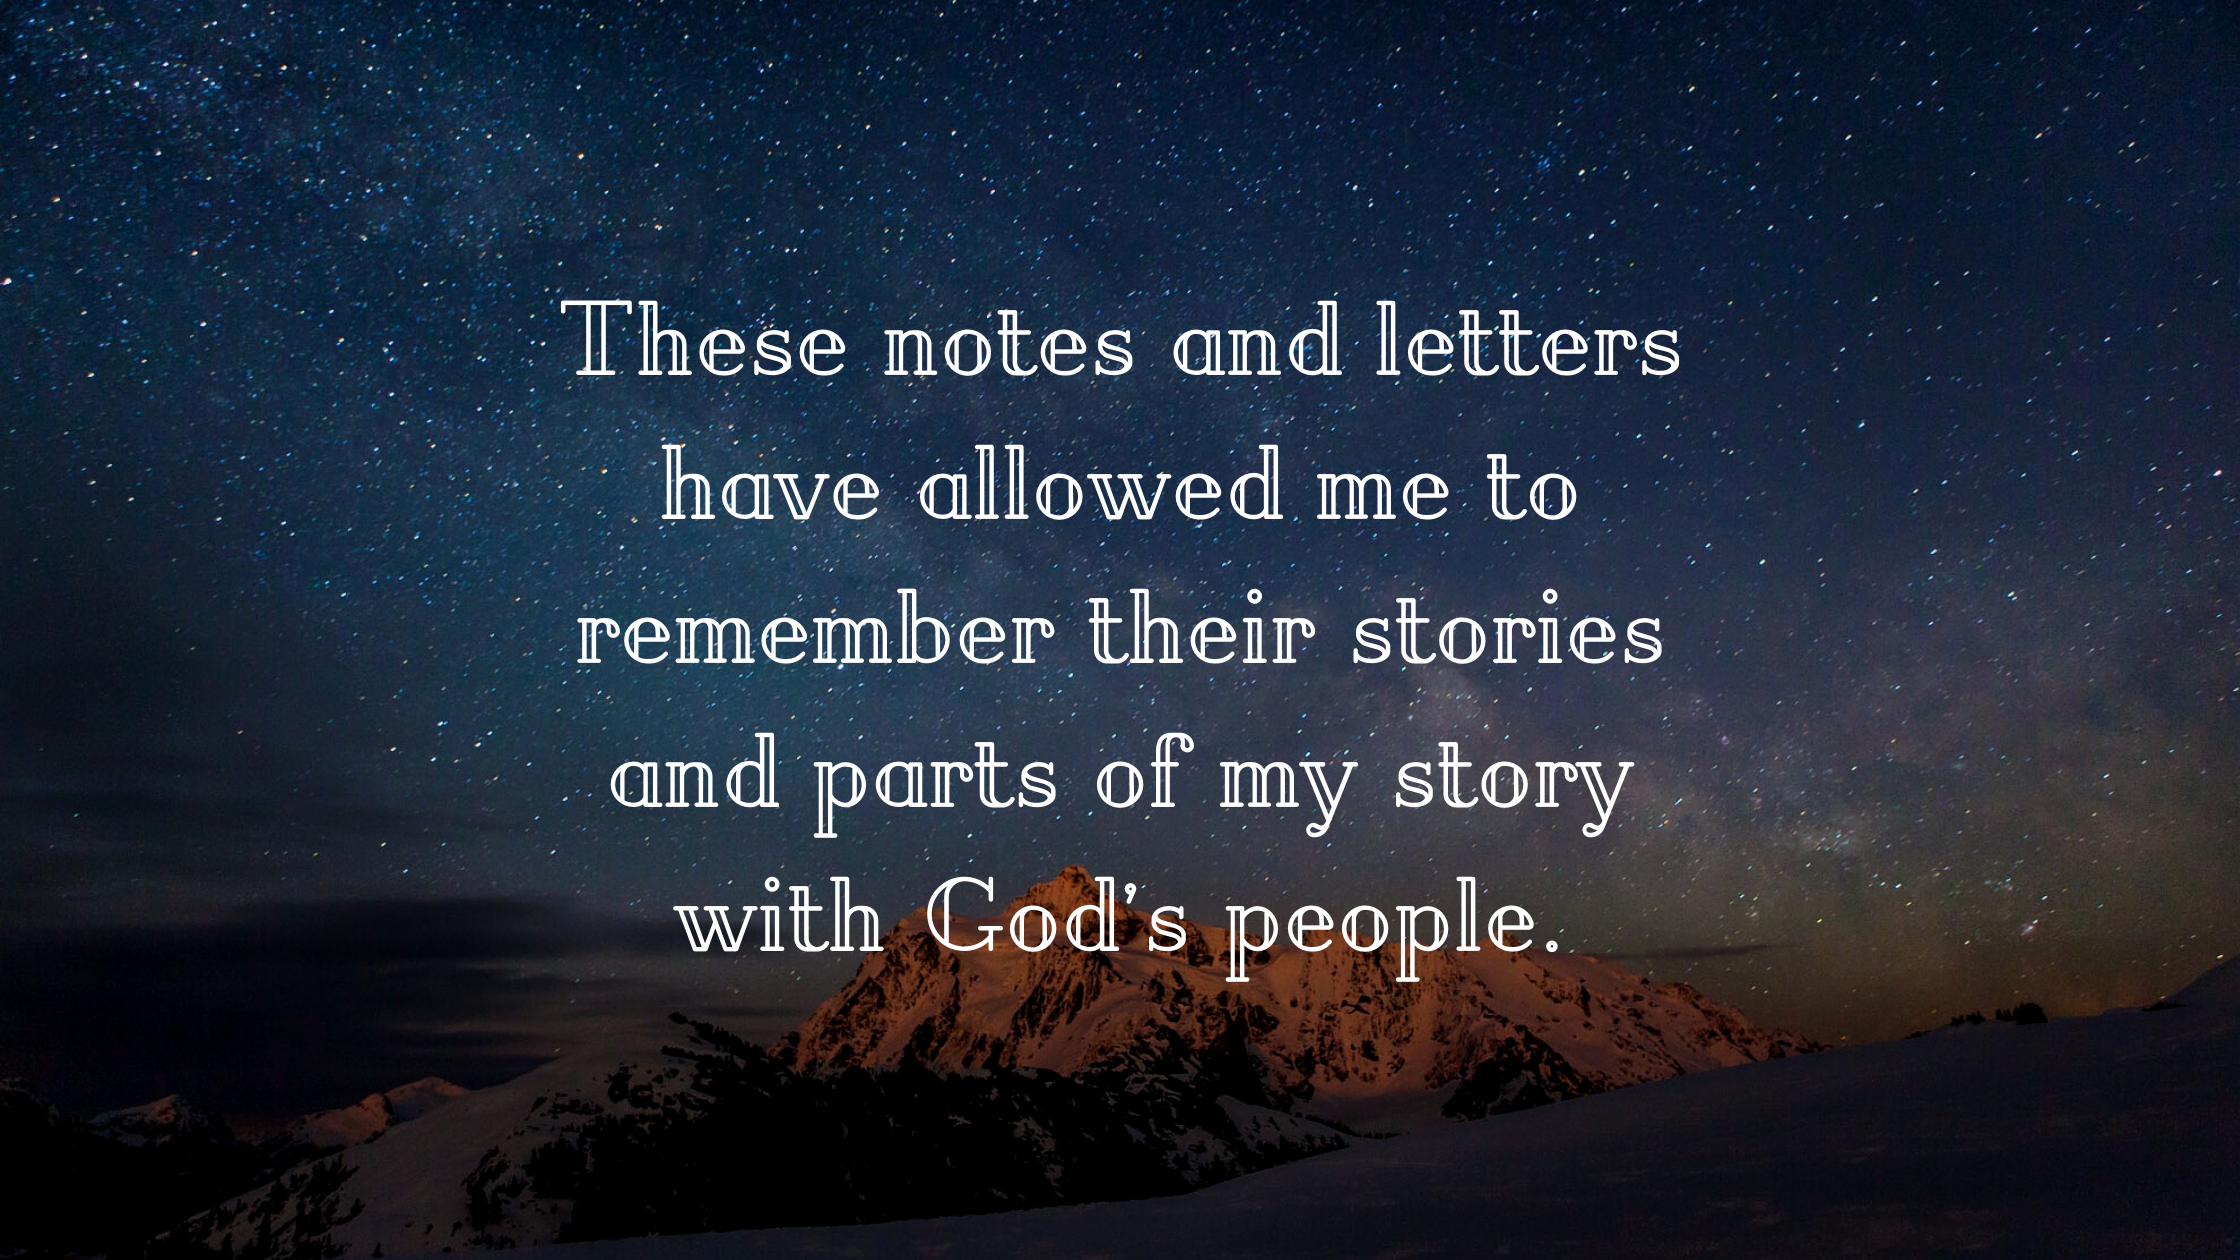 These notes and letters have allowed me to remember their stories and parts of my story with God’s people.